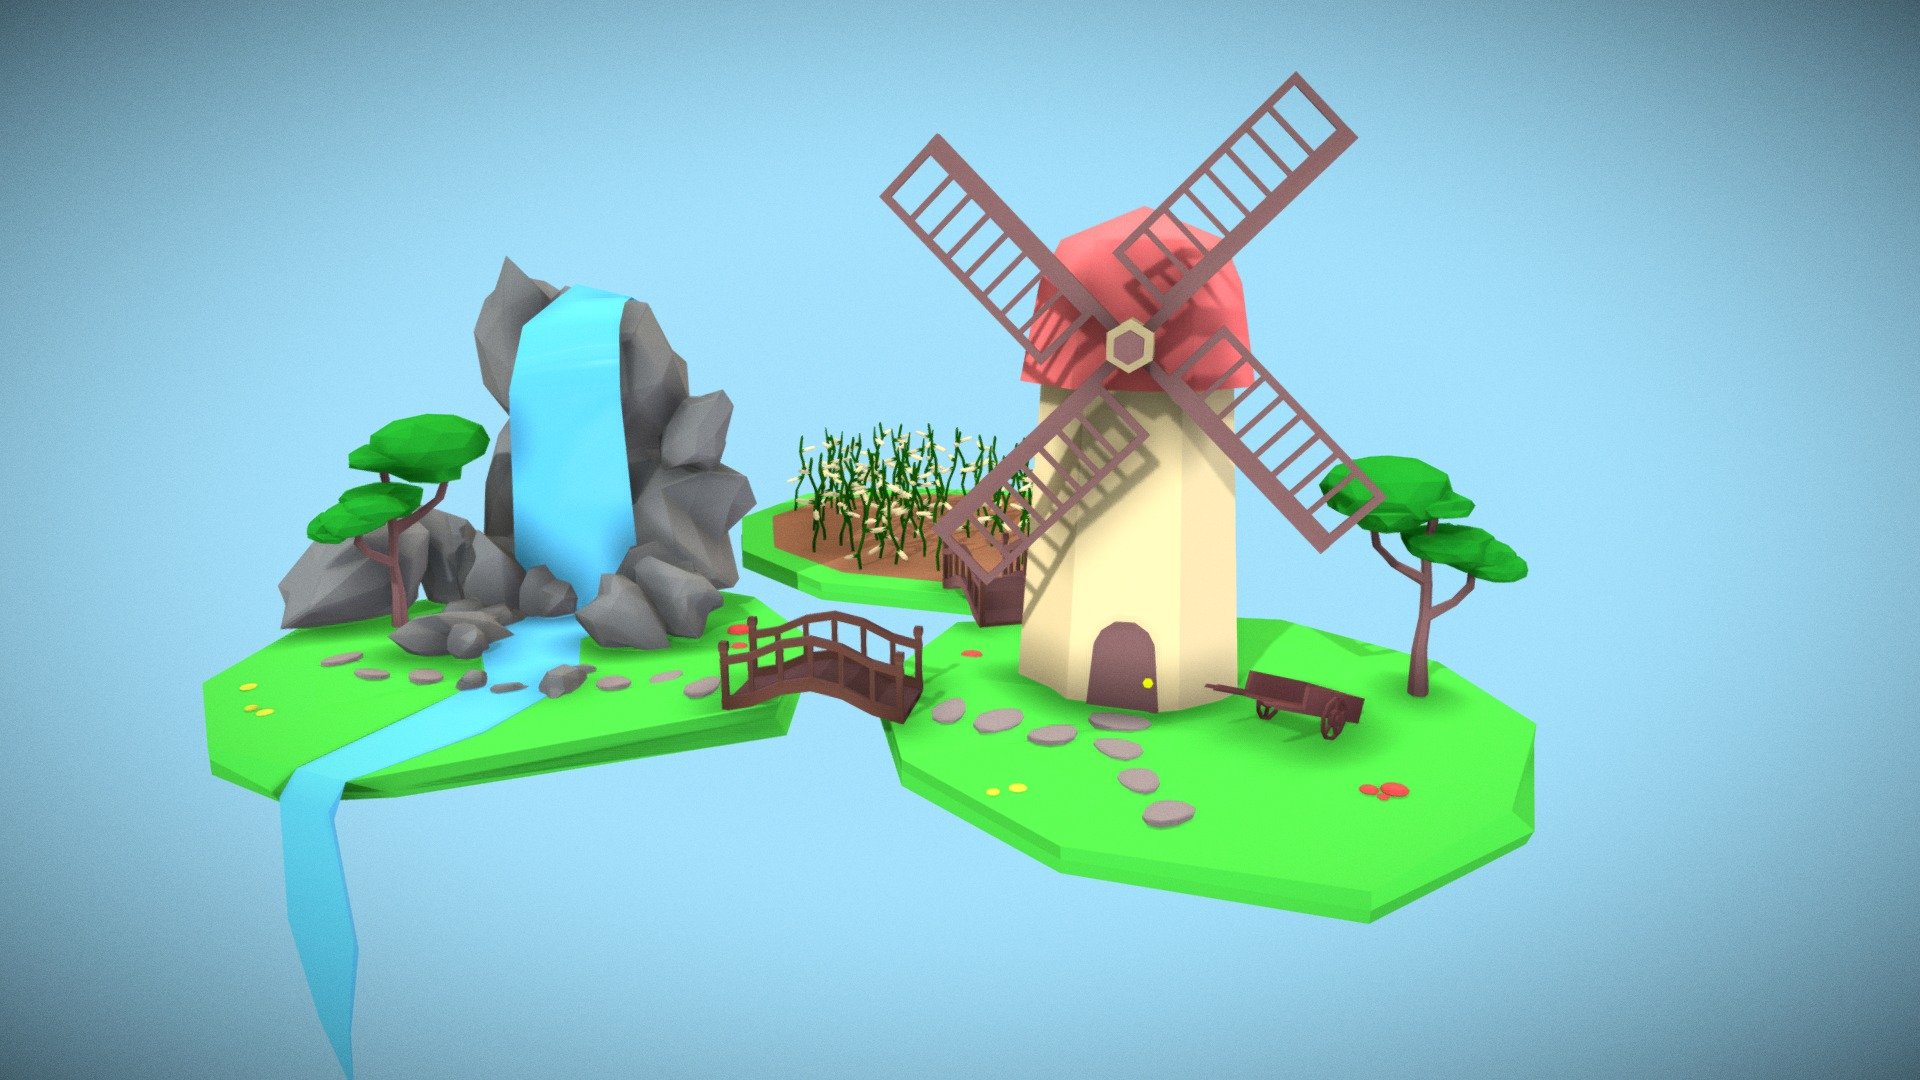 A simple low poly scene with a windmill as the protagonist. No texture used, just plain materials. Made with Blender - Low Poly Windmill - 3D model by maglions 3d model